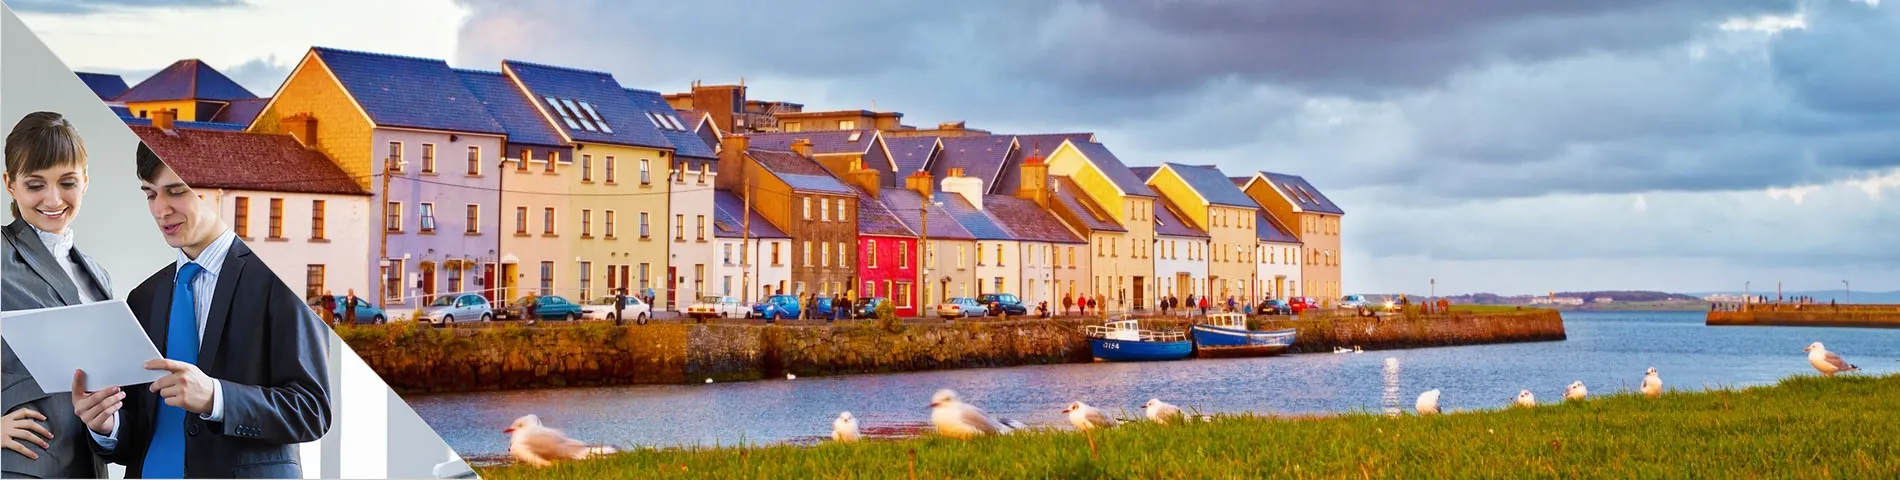 Galway - Business Individuale